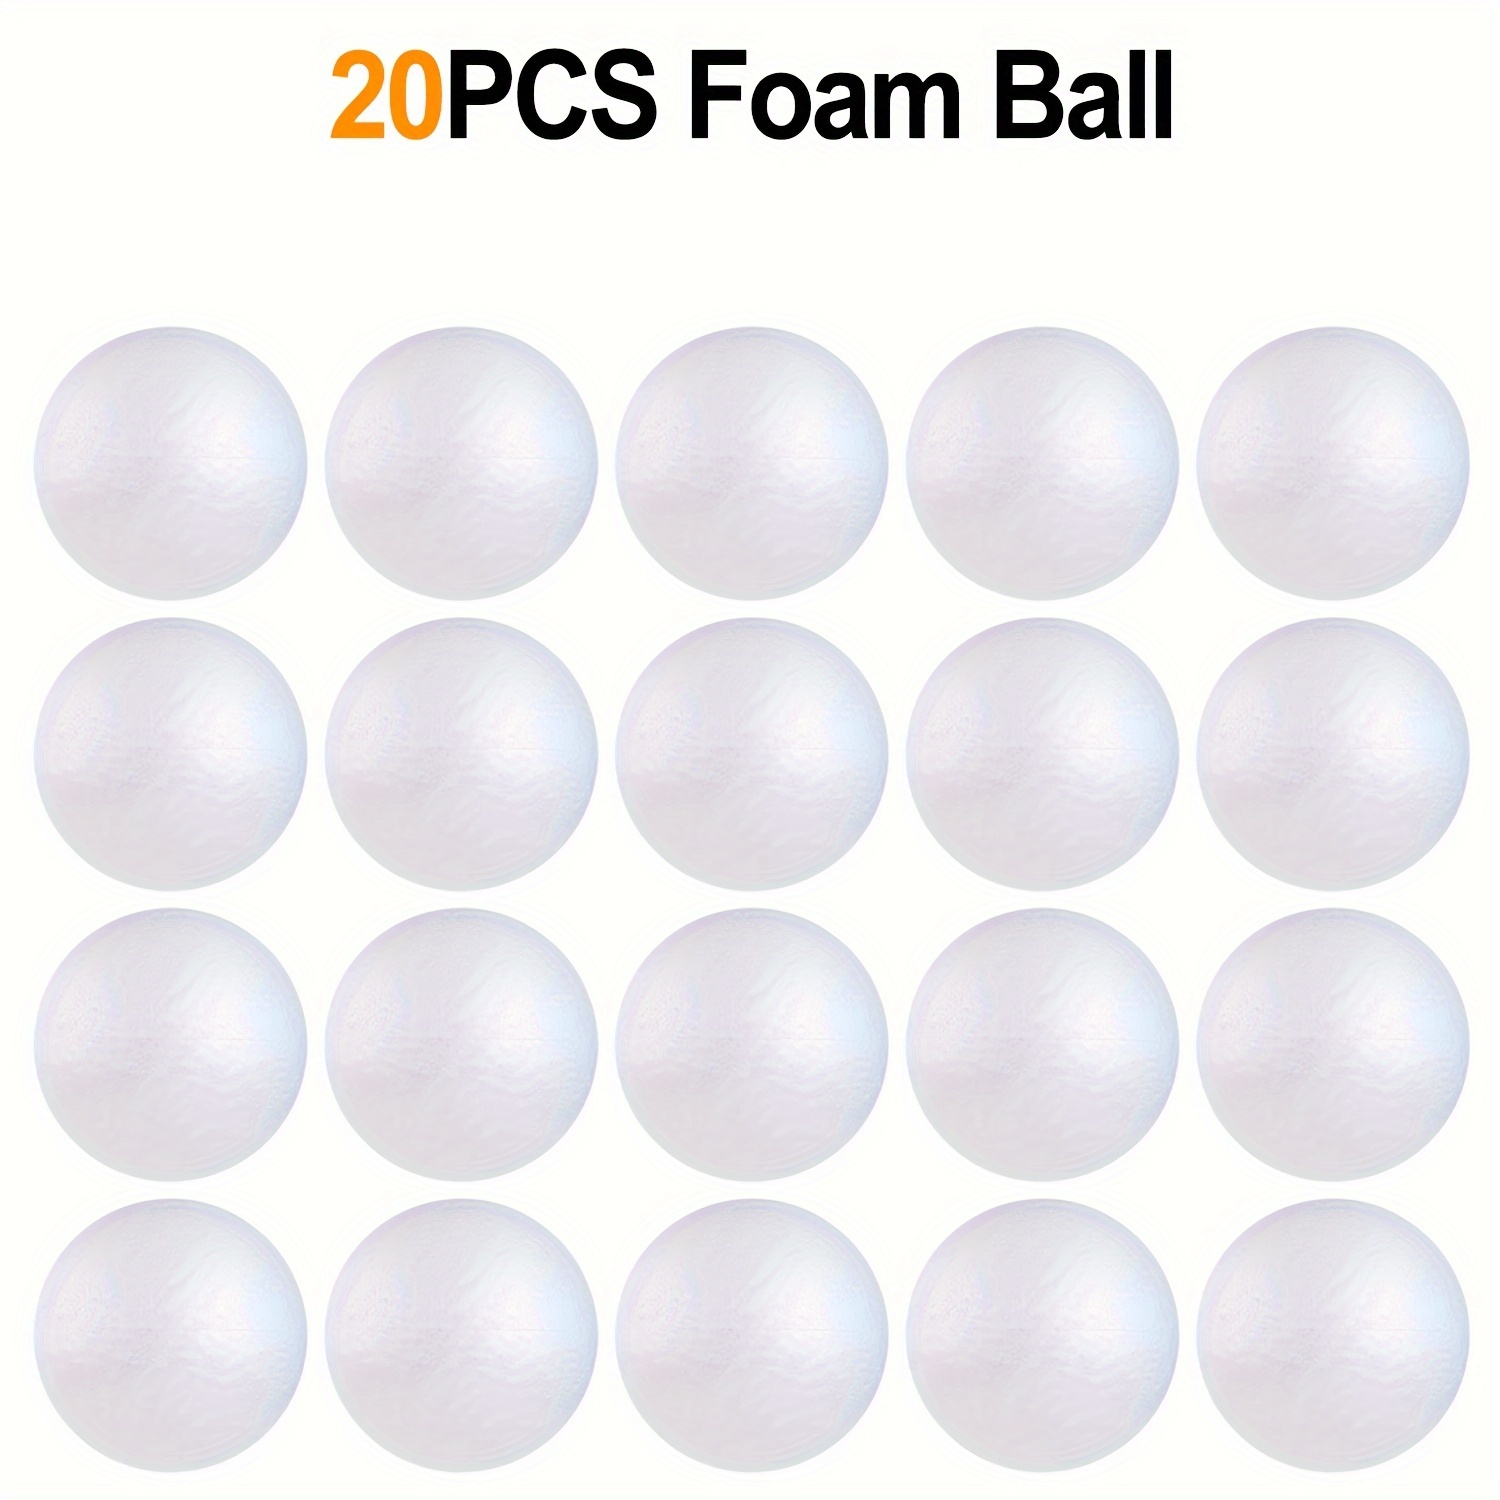 Craft Balls (3 Inch - 7.62 cm) Polystyrene Foam Balls for DIY Crafting and  Decoration by My Toy House | White Color (18 Pack)